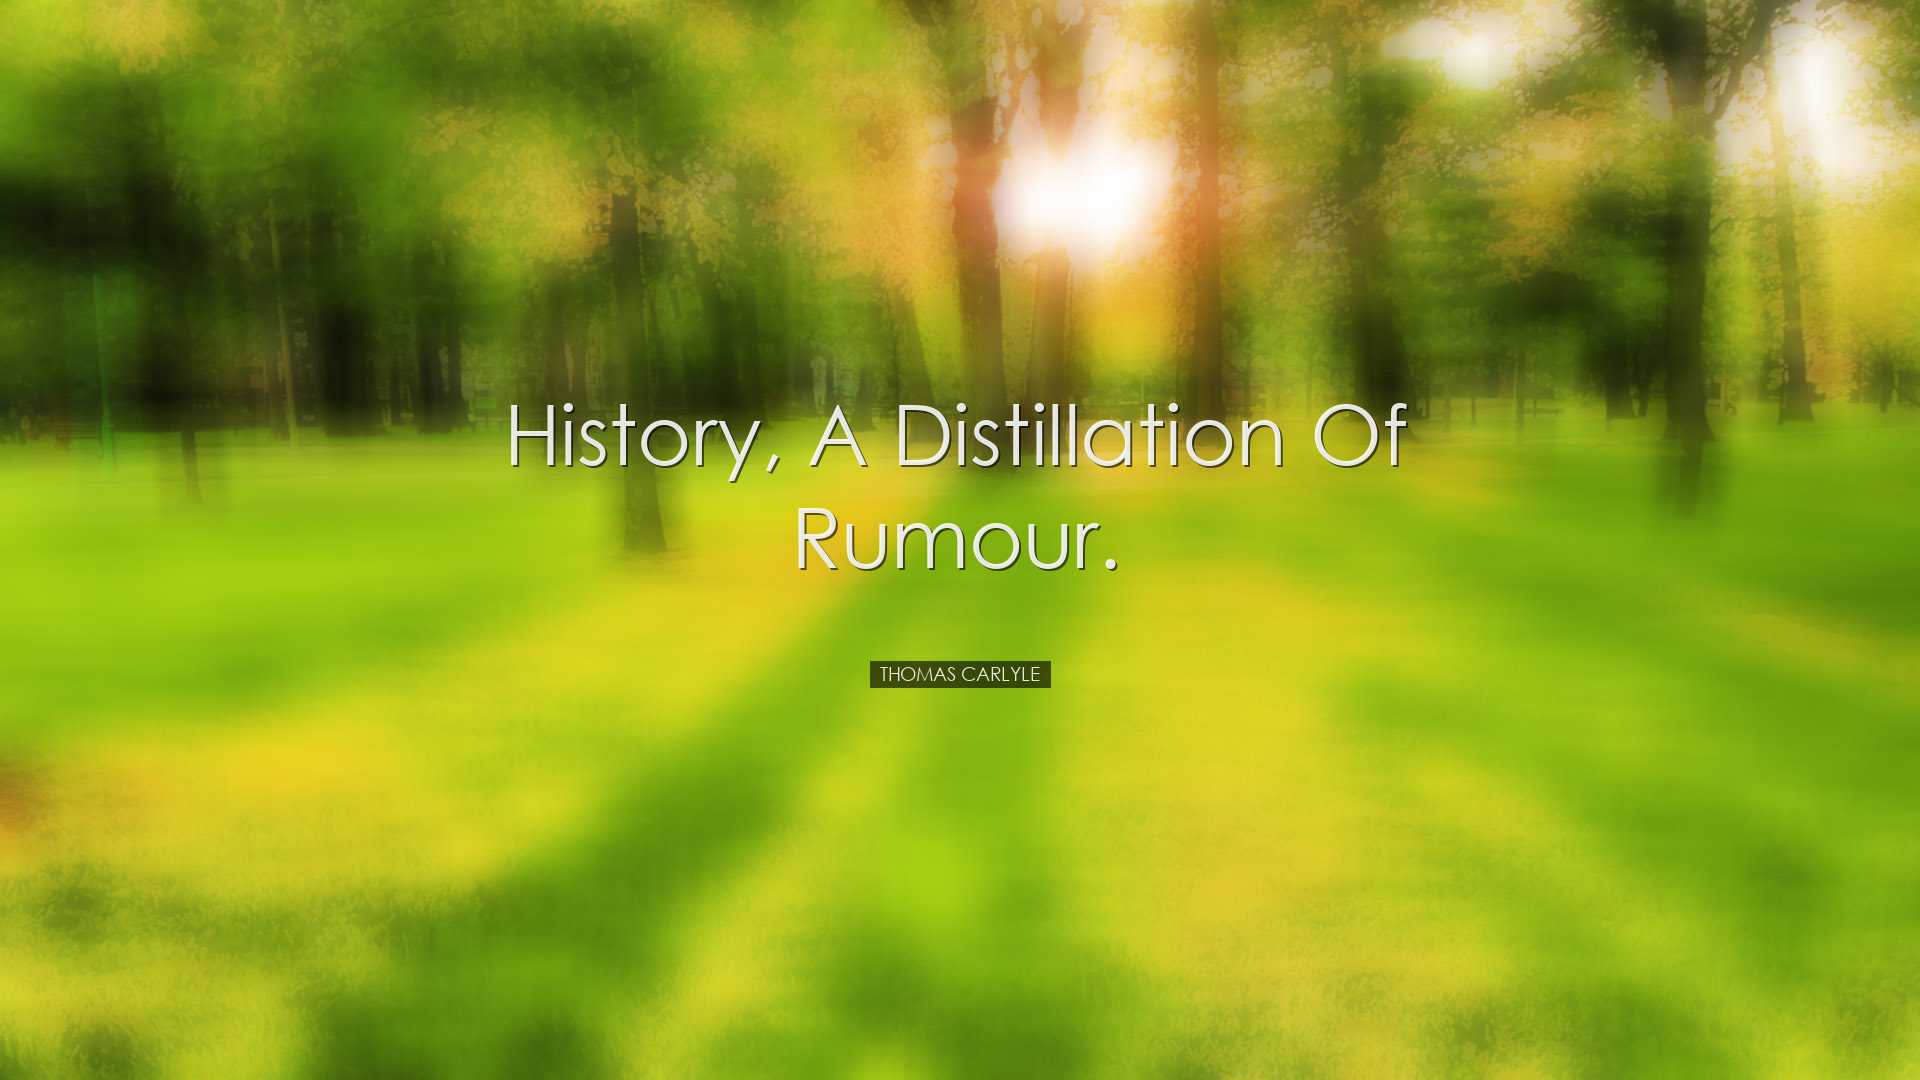 History, a distillation of rumour. - Thomas Carlyle